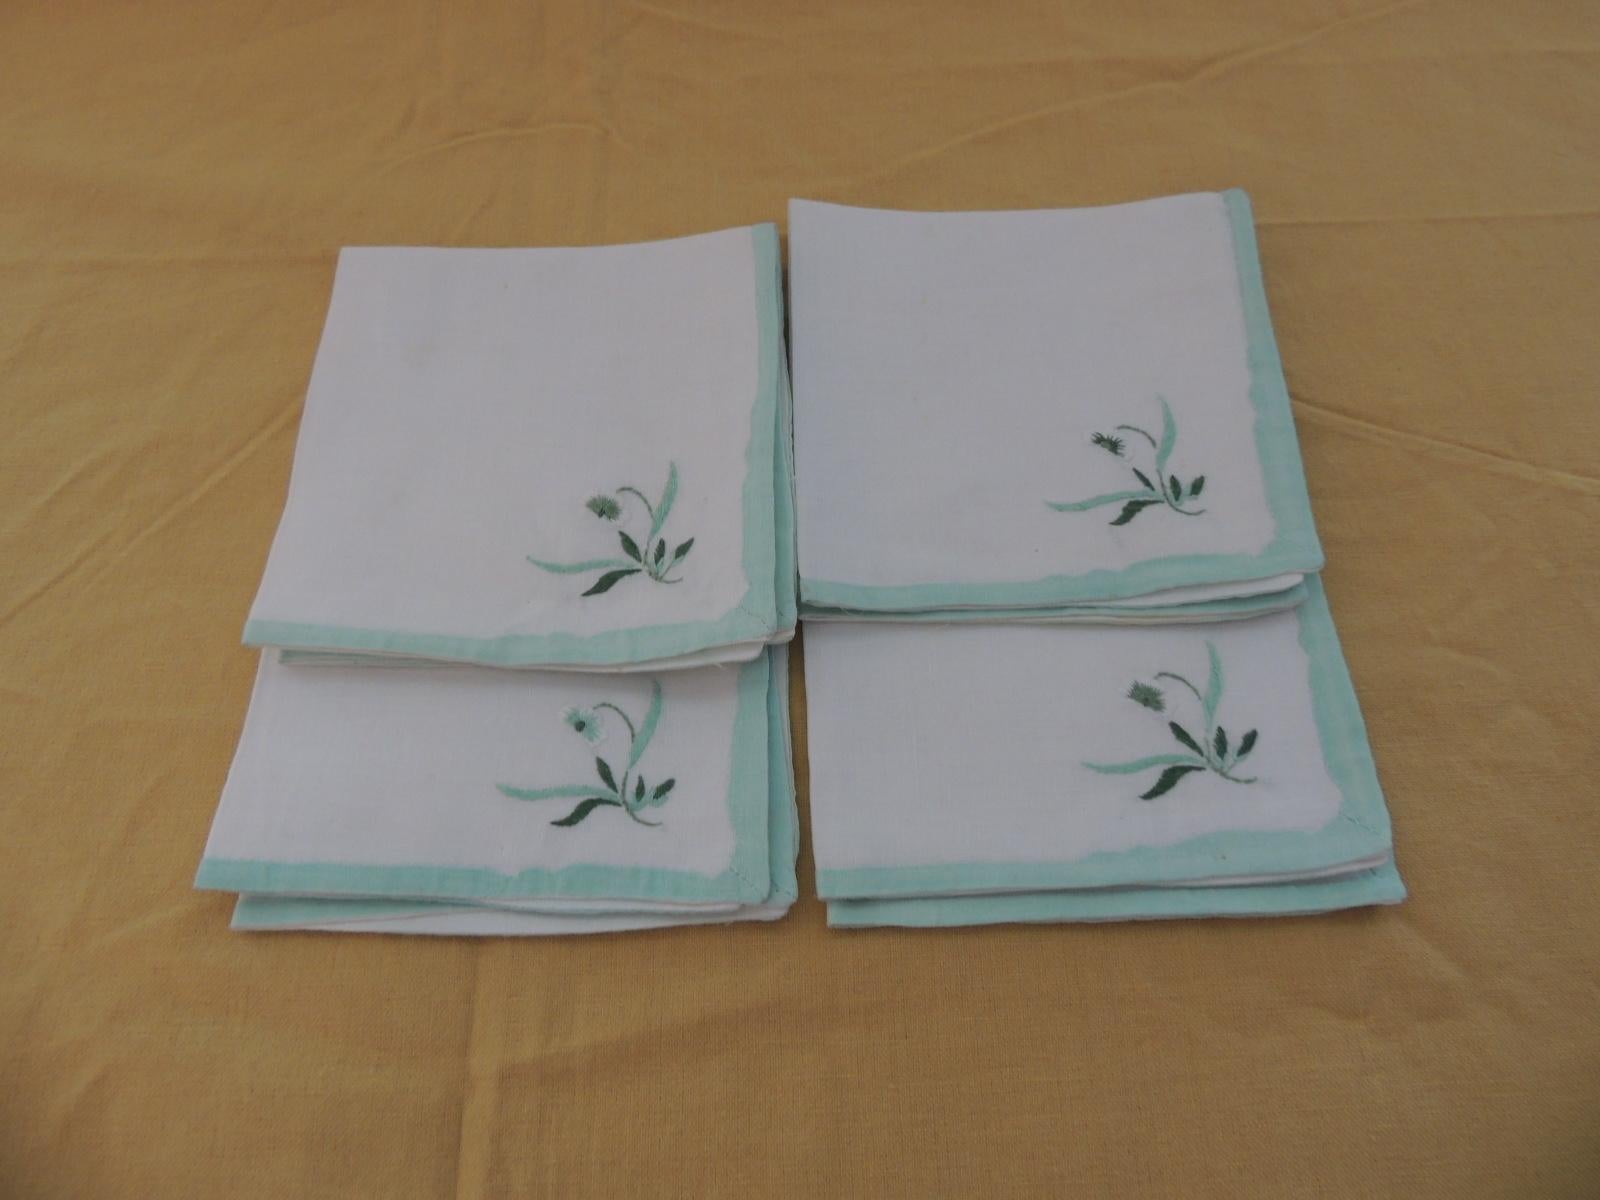 Vintage 100% linen embroidered set of 4 hand towels in white and green napkins
Italian
1980's
Size 10.5 x 10 x 0.03.